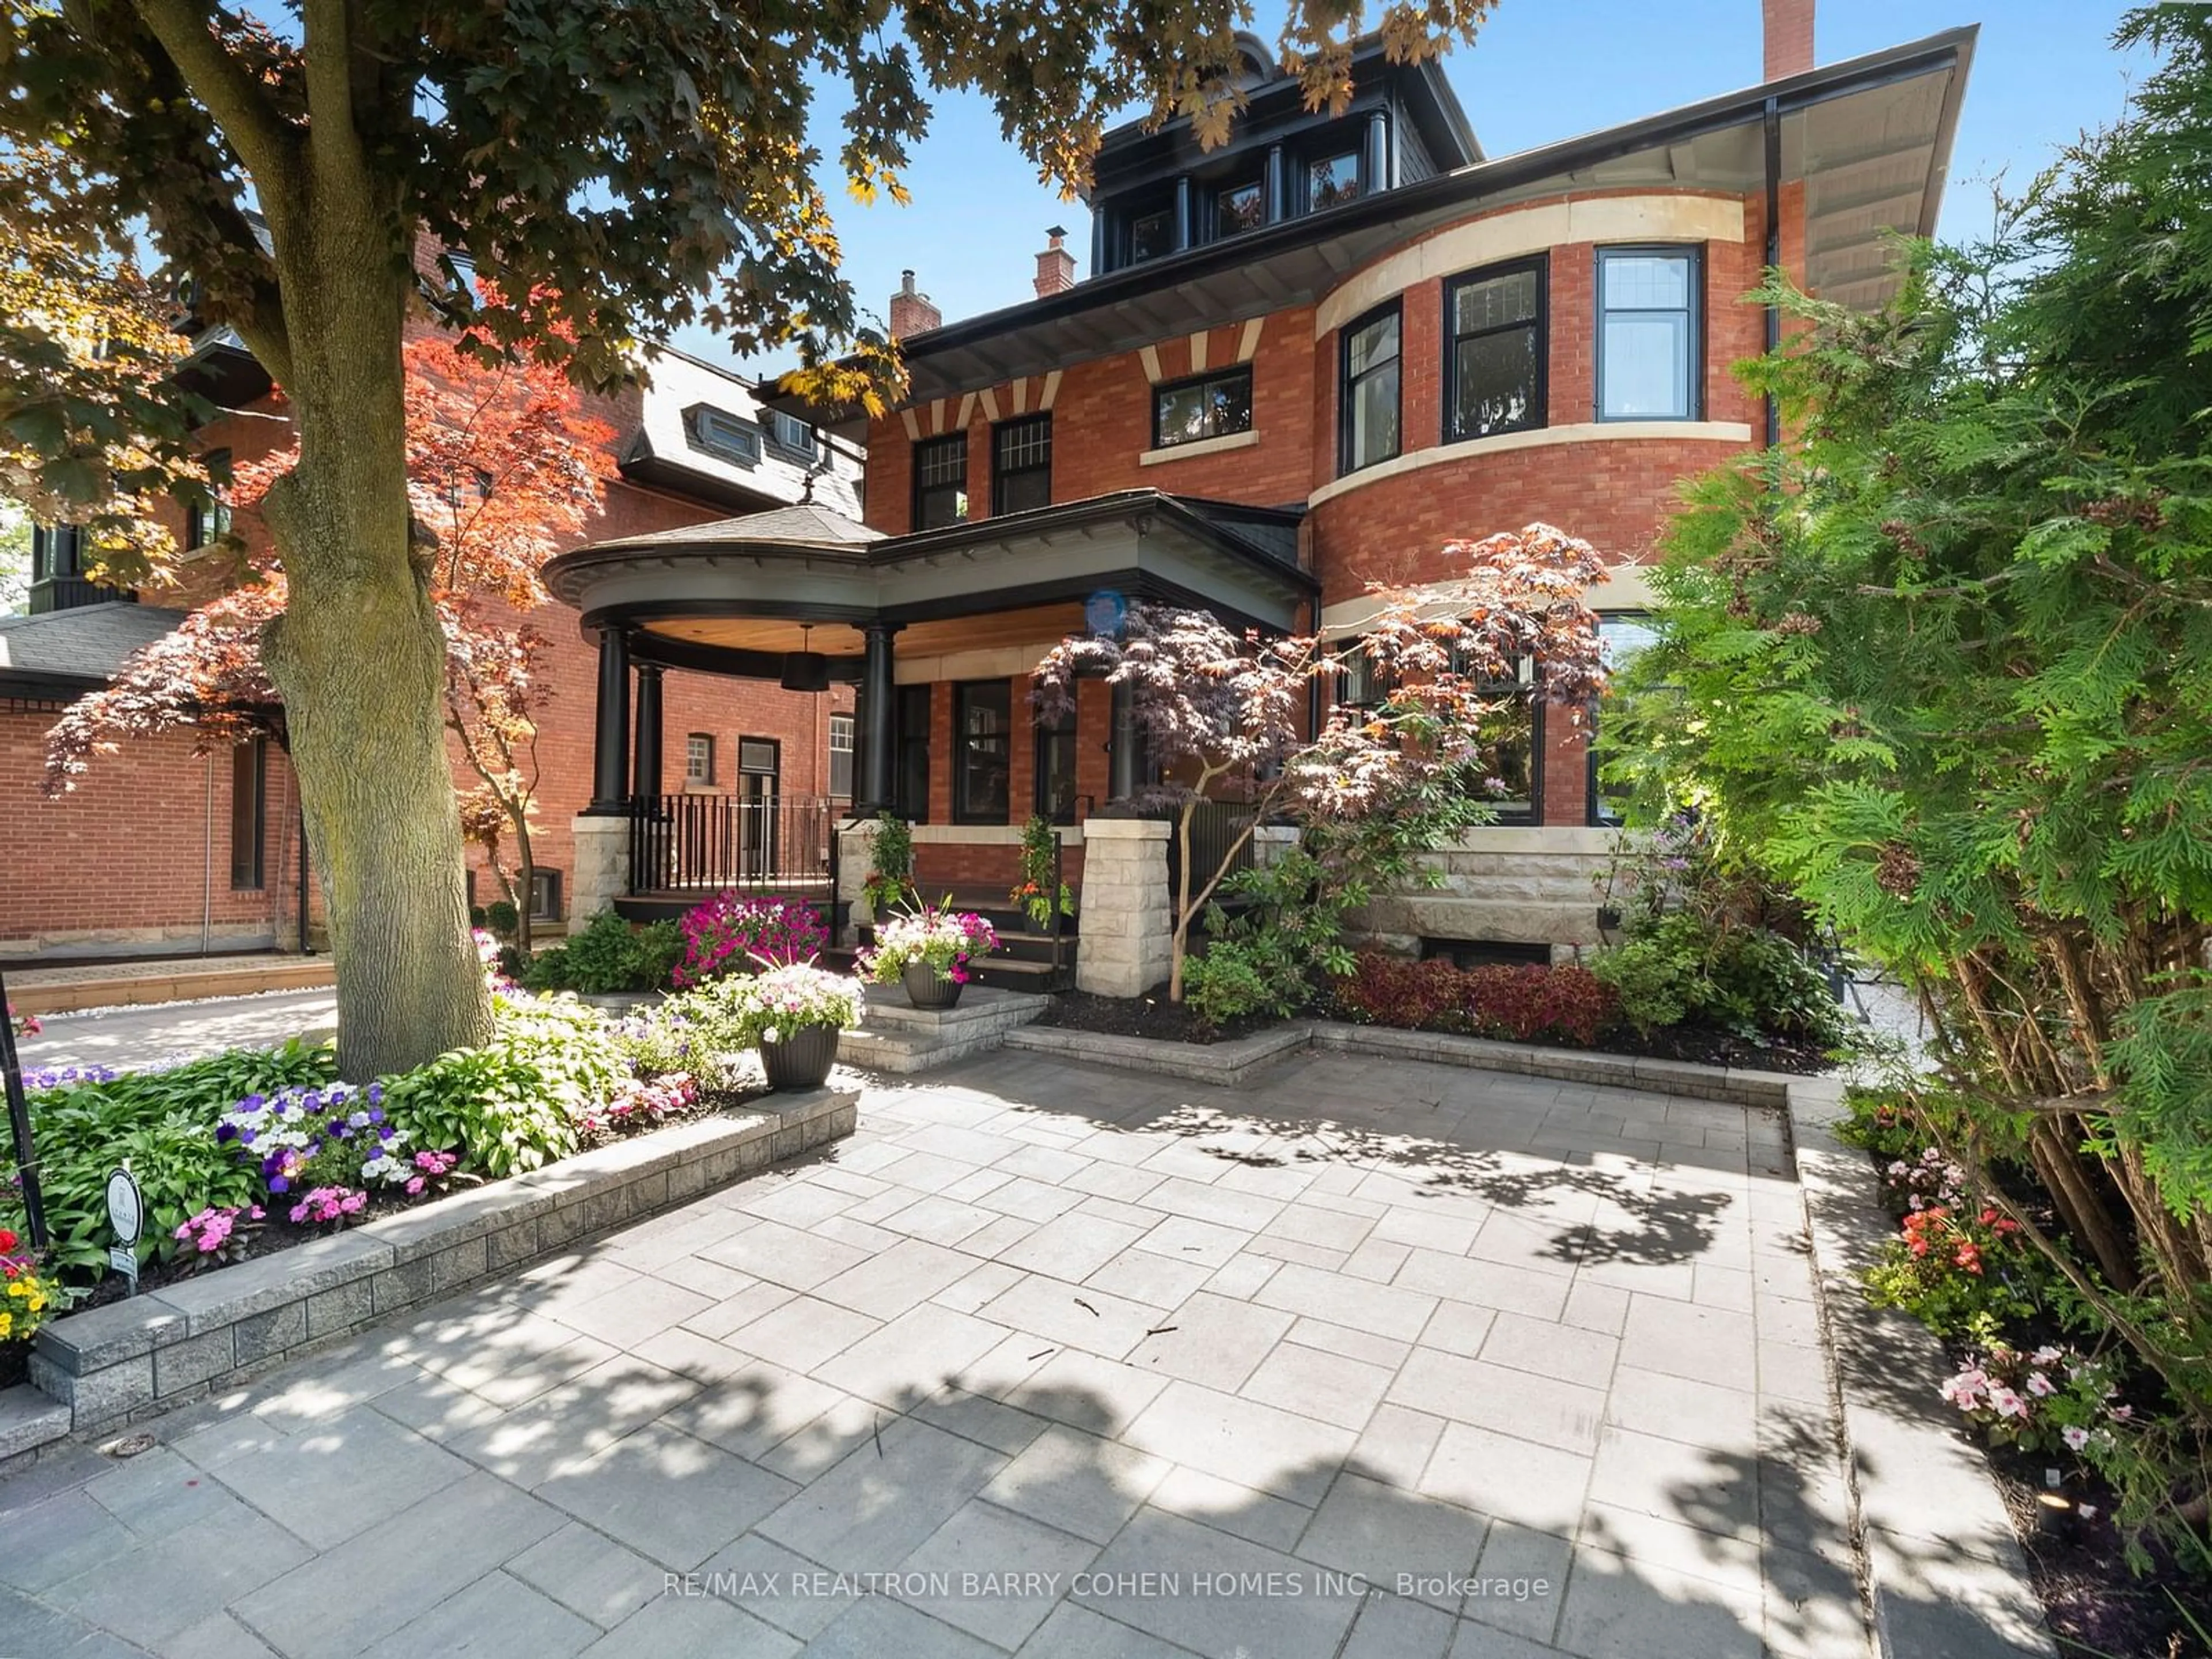 Home with brick exterior material for 135 Crescent Rd, Toronto Ontario M4W 1T8